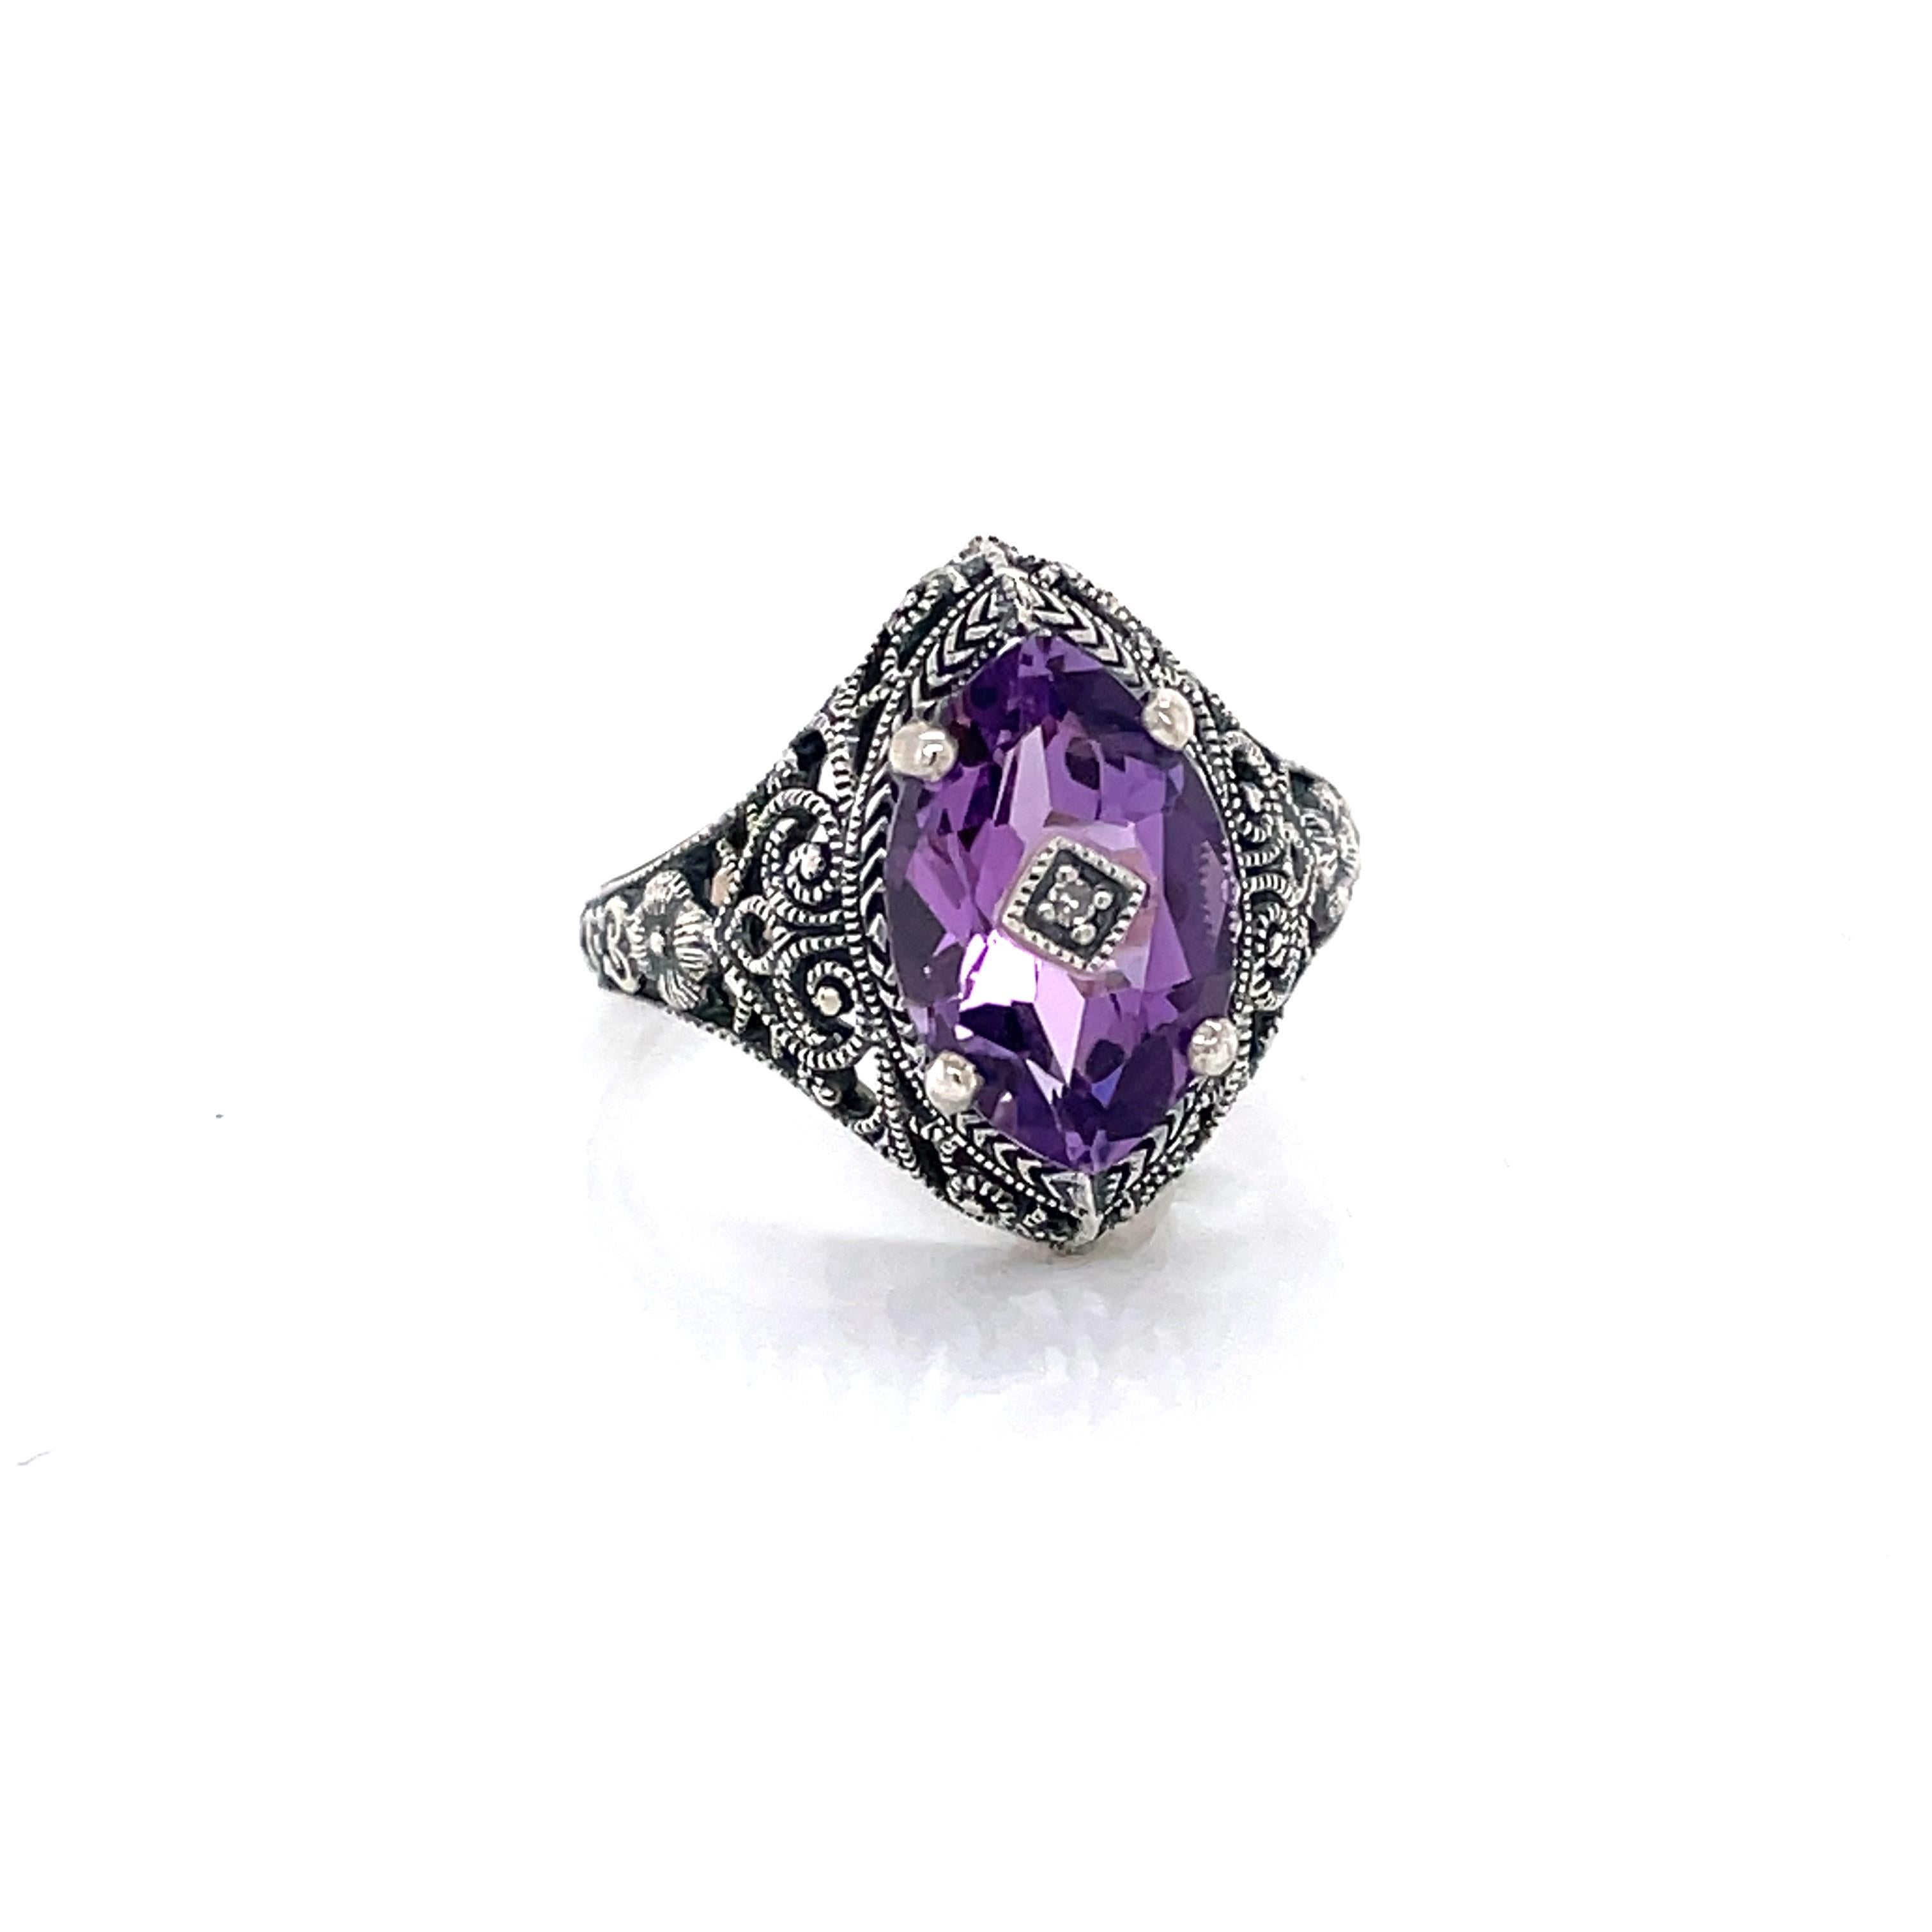  In Victorian style, the regal hue of this purple oval faceted amethyst catches the eye. A center diamond accent detail compliments the intricate filigree in .925 sterling silver.
In ring size 8. New and presented in an antique style gift box.   